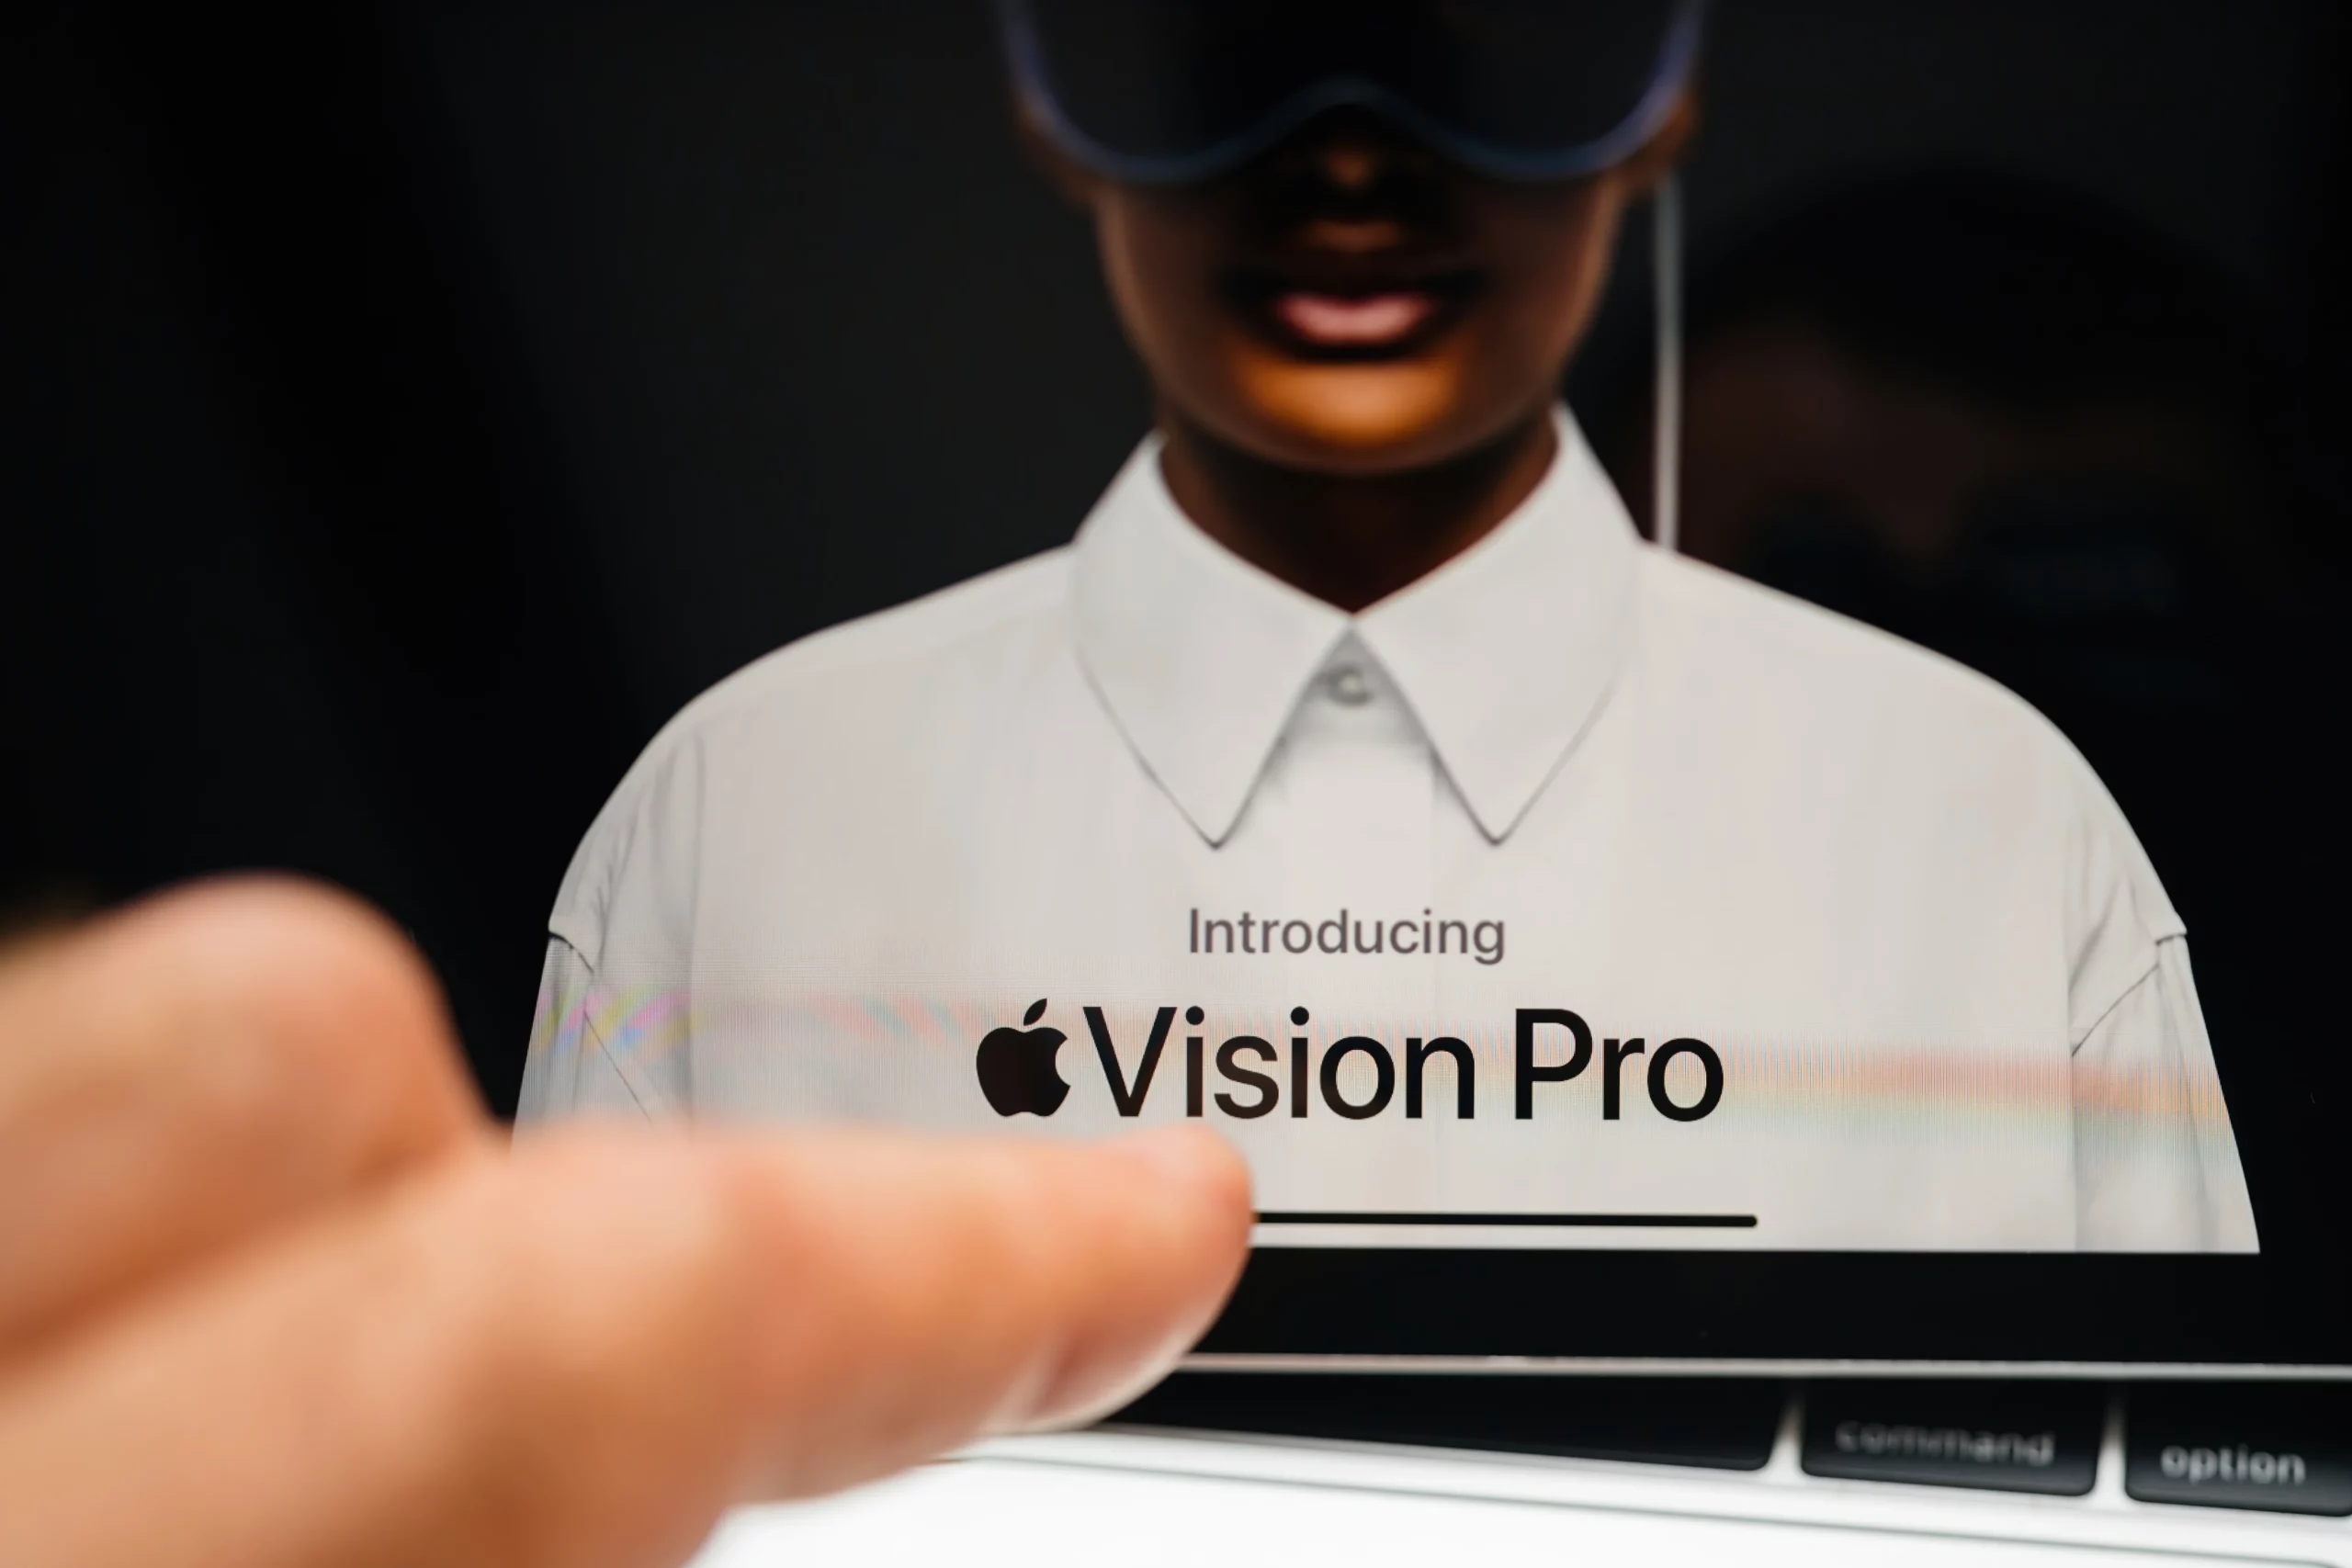 Apple Aims to Integrate AI Features into Vision Pro Headsets